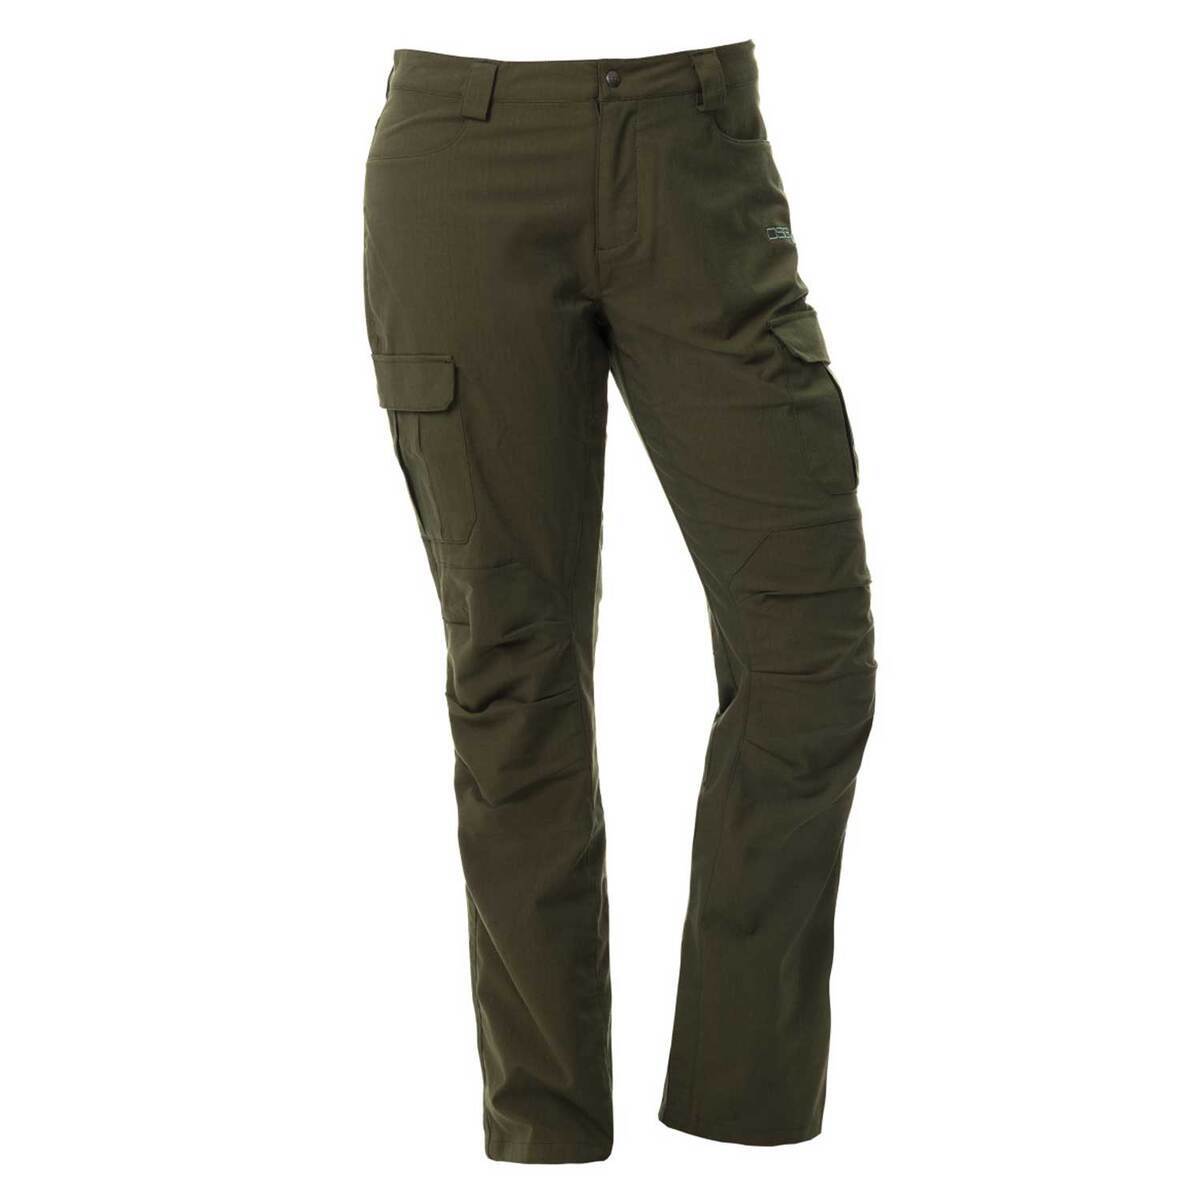 DSG Outerwear Women's Field Hunting Pants - Olive - 16 - Olive 16